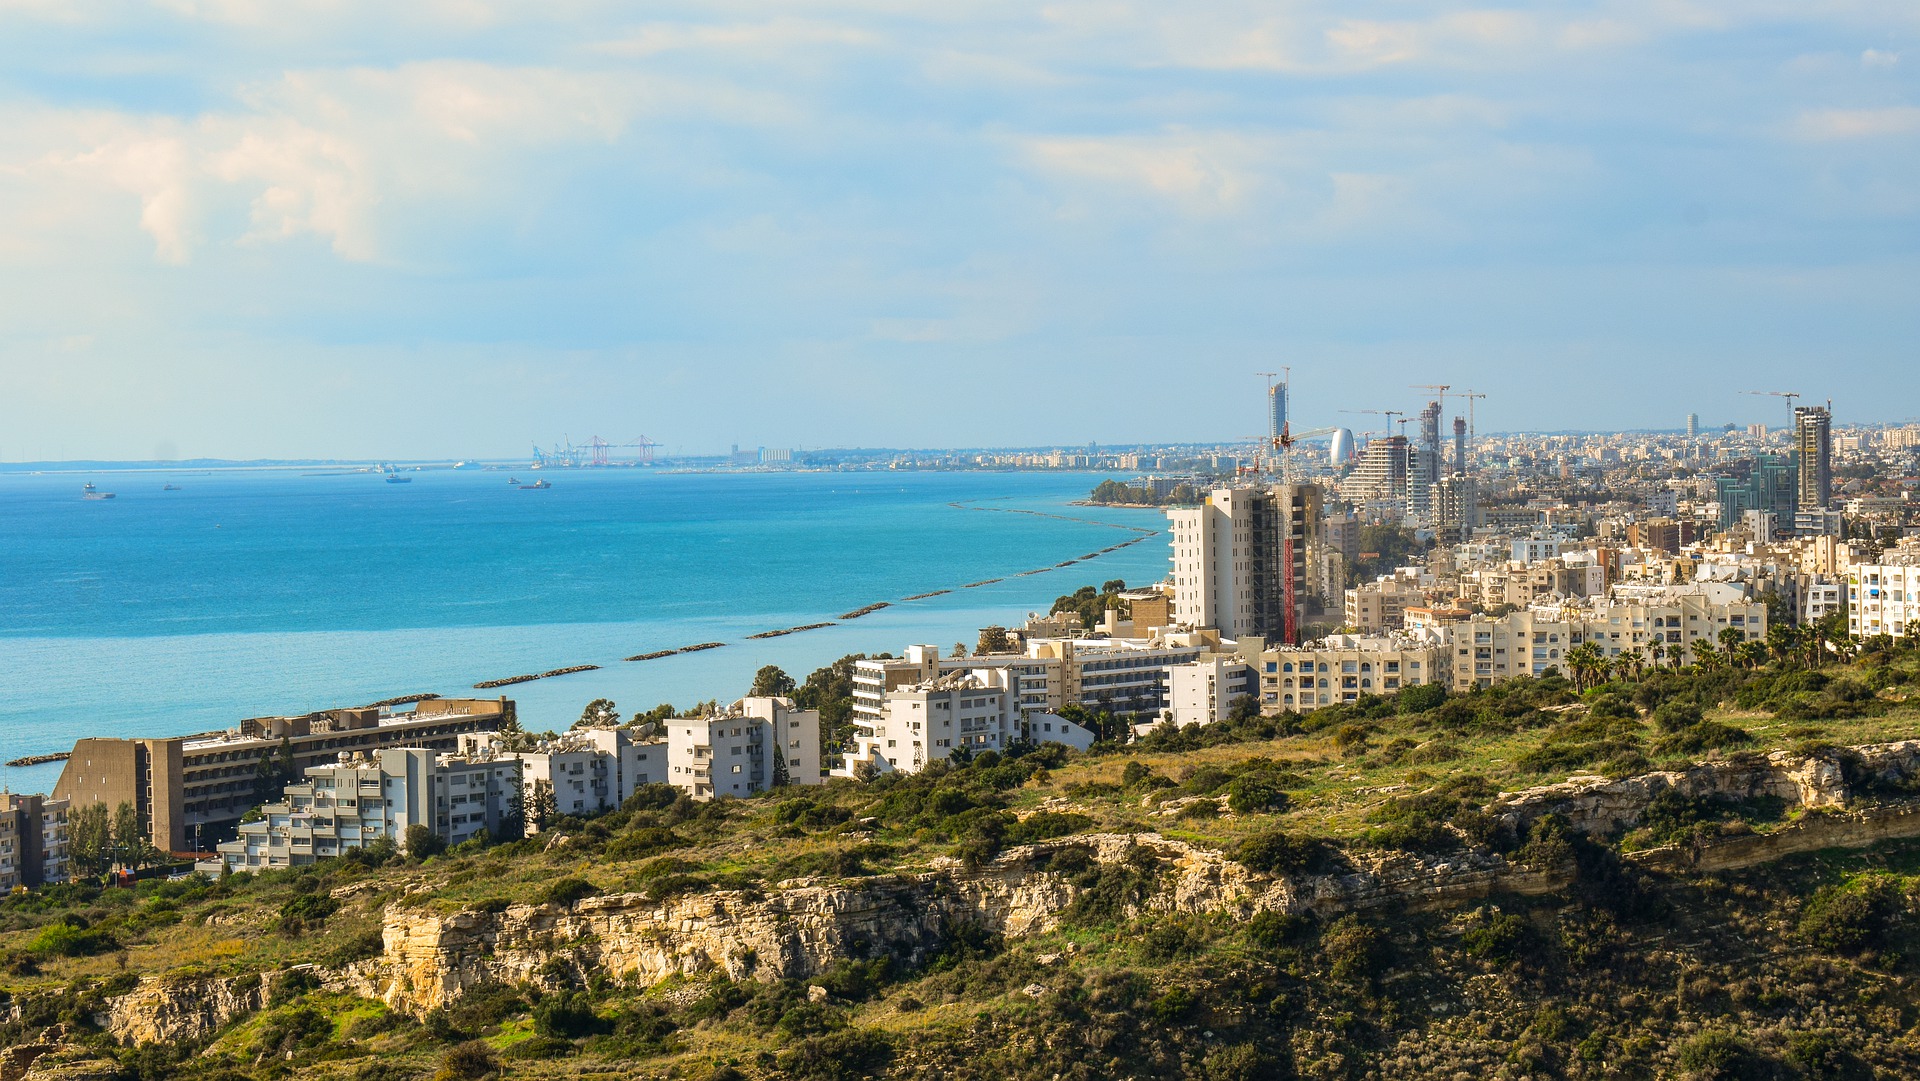 WILL THE CYPRUS REAL ESTATE MARKET SAVE ITS POSITION IN 2021?